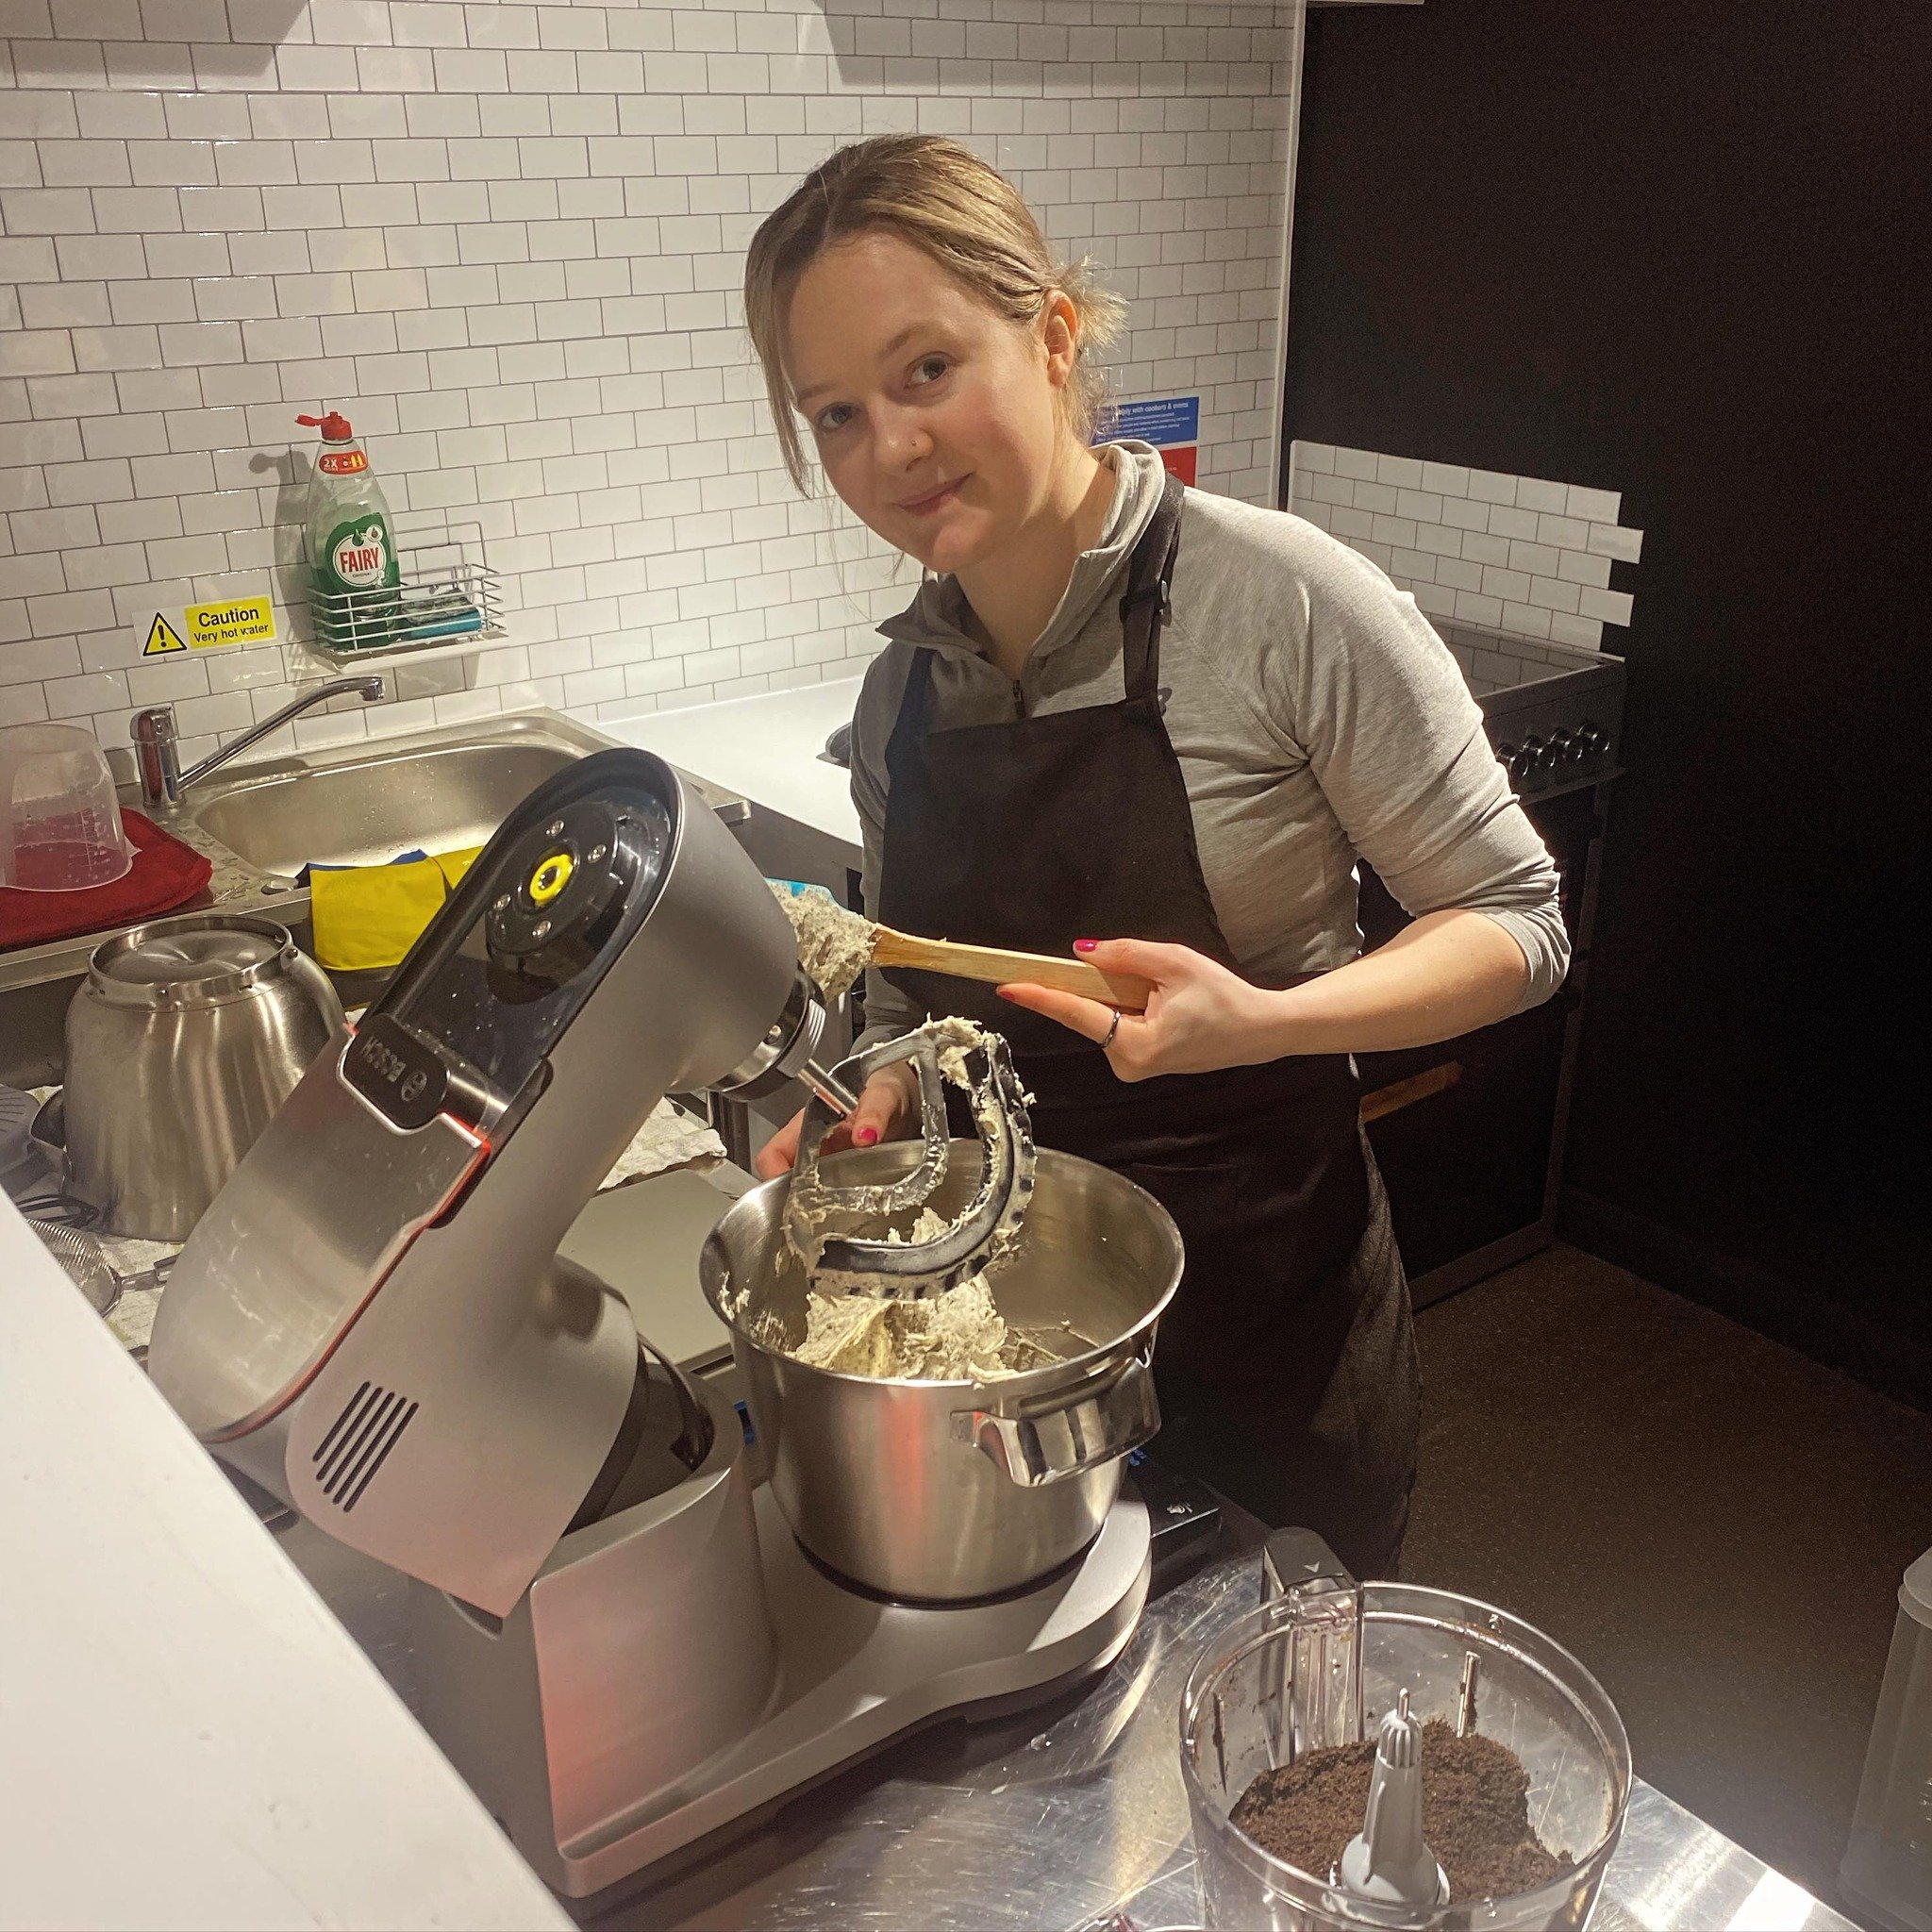 The master @abbylouise.anderson at work! 

When she&rsquo;s not keeping @waller_mtb in check she&rsquo;s baking like mad, not to mention developing new recipes!

Abby is SUPER excited to have Cookies &amp; Cream as a new permanent flavour too as it&r